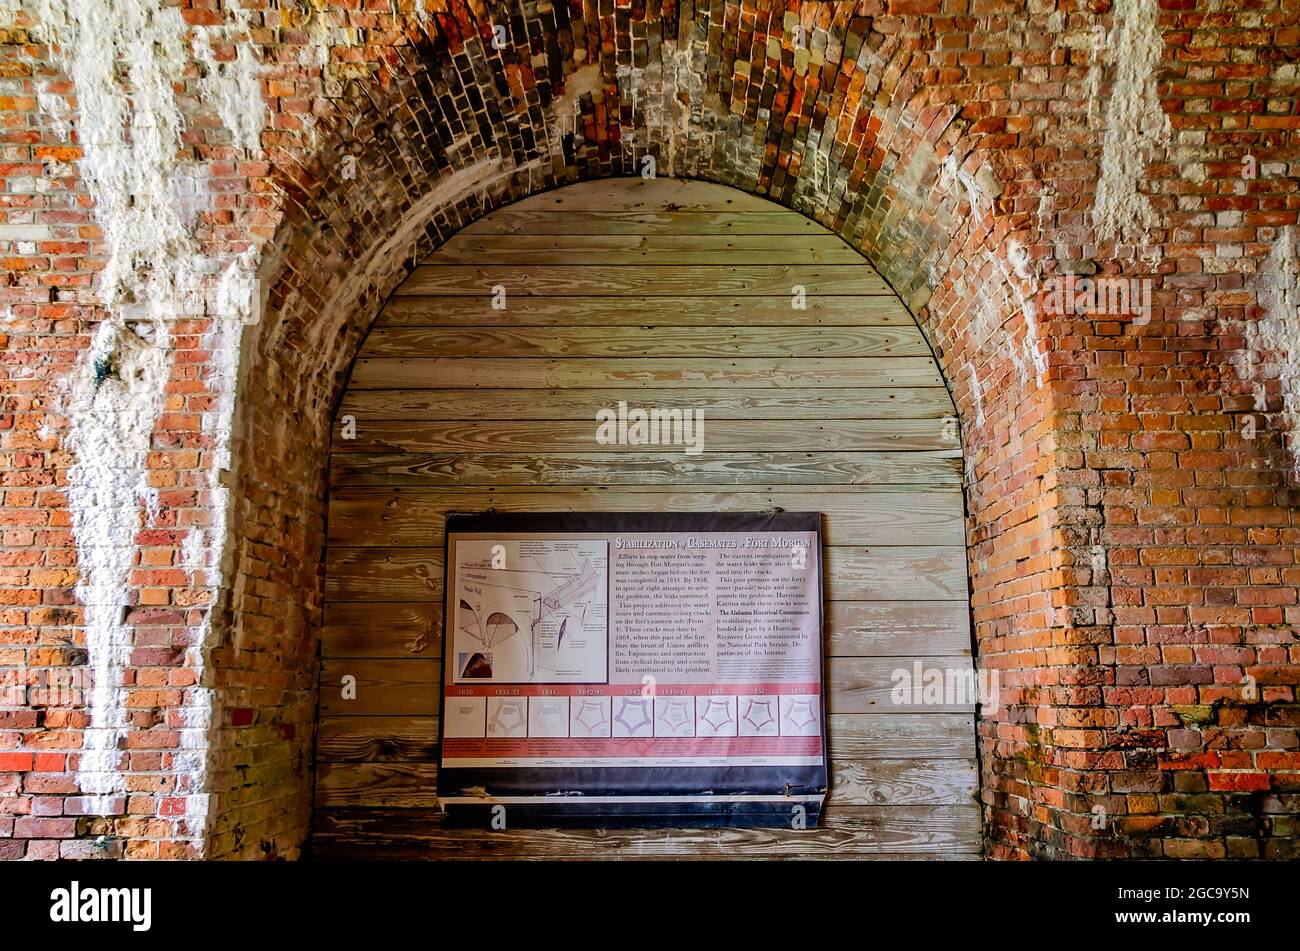 A poster details attempts to protect and stabilize the casemates at Fort Morgan, July 31, 2021, in Gulf Shores, Alabama. Fort Morgan was built in 1834. Stock Photo